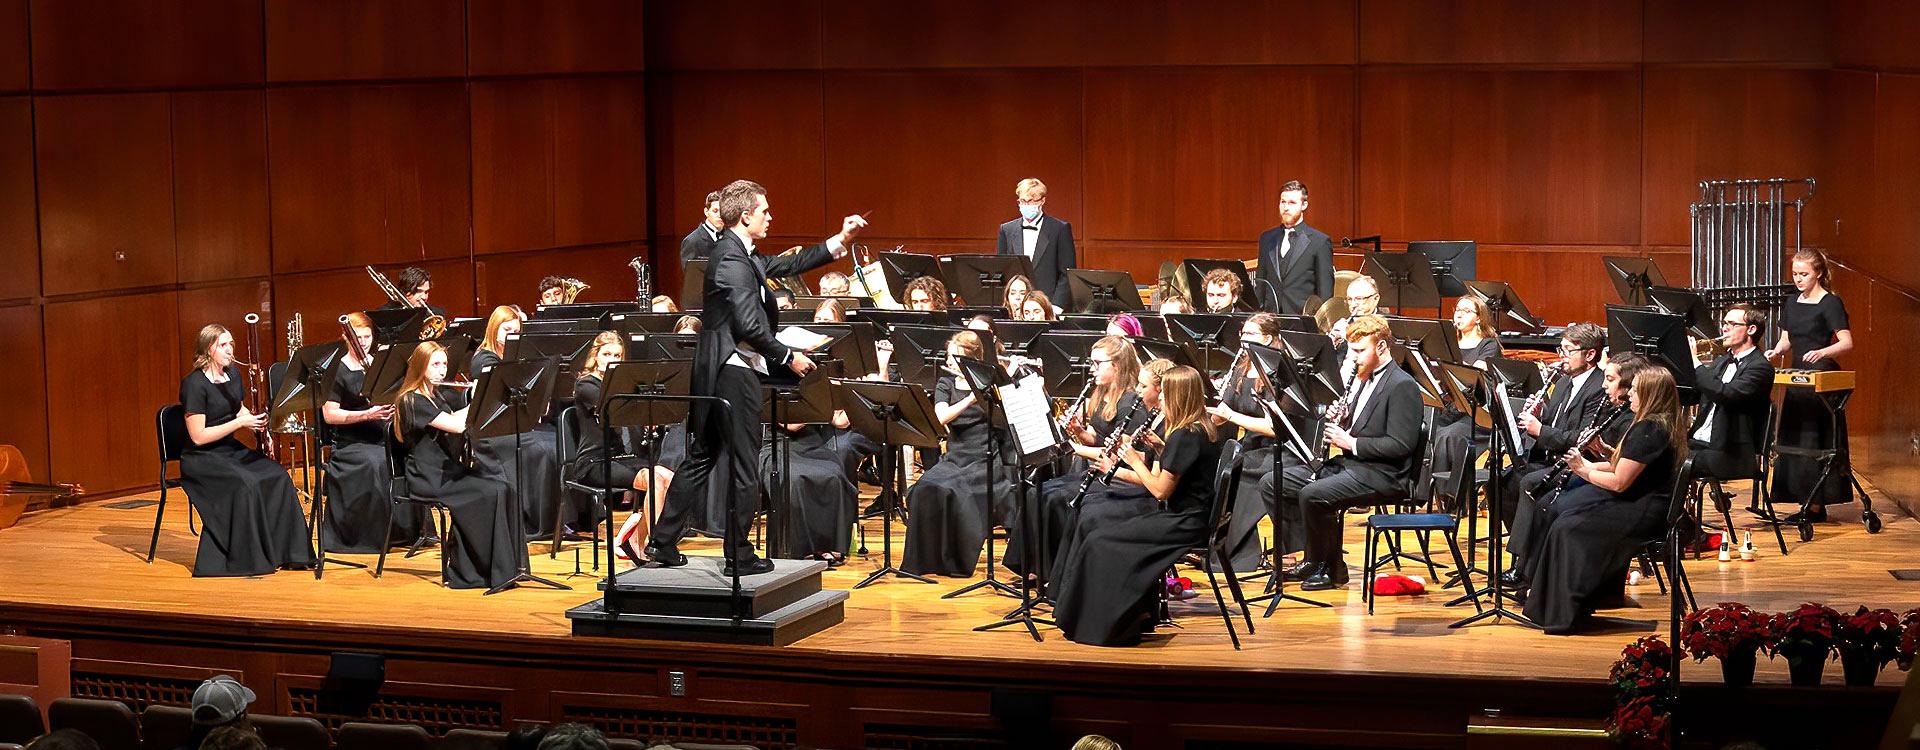 Concert band performing